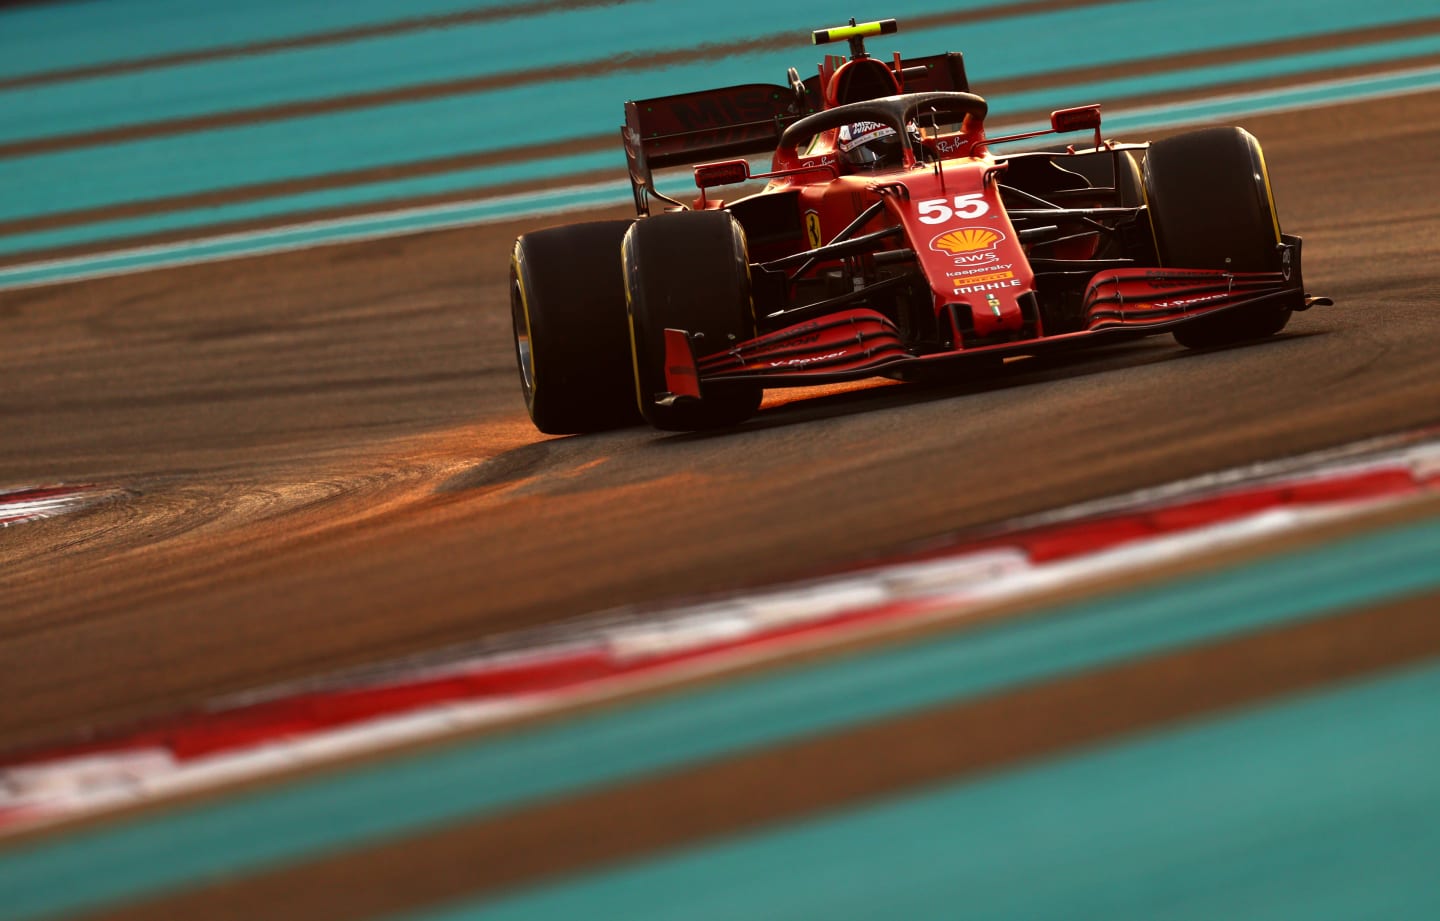 ABU DHABI, UNITED ARAB EMIRATES - DECEMBER 11: Carlos Sainz of Spain driving the (55) Scuderia Ferrari SF21 during qualifying ahead of the F1 Grand Prix of Abu Dhabi at Yas Marina Circuit on December 11, 2021 in Abu Dhabi, United Arab Emirates. (Photo by Clive Rose/Getty Images)